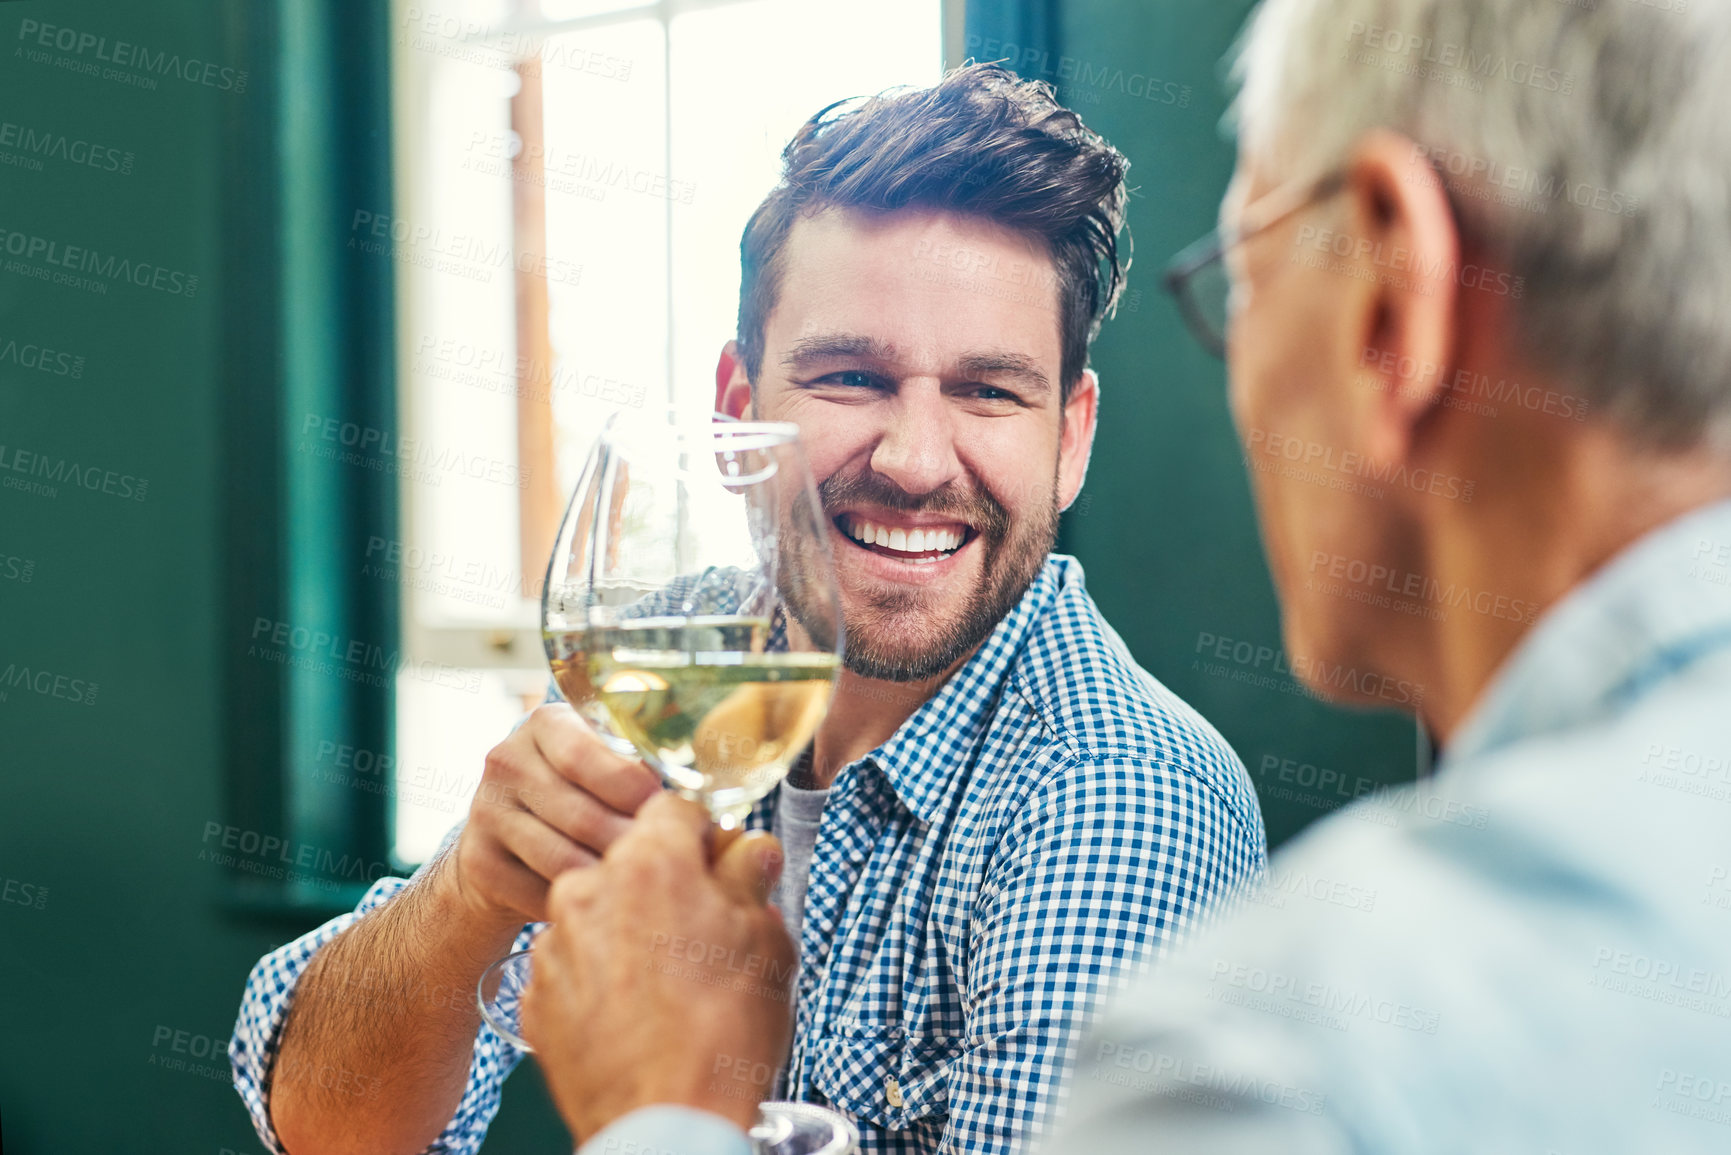 Buy stock photo Shot of a cheerful young man and his mature father sharing a celebratory toast with wine glasses at home